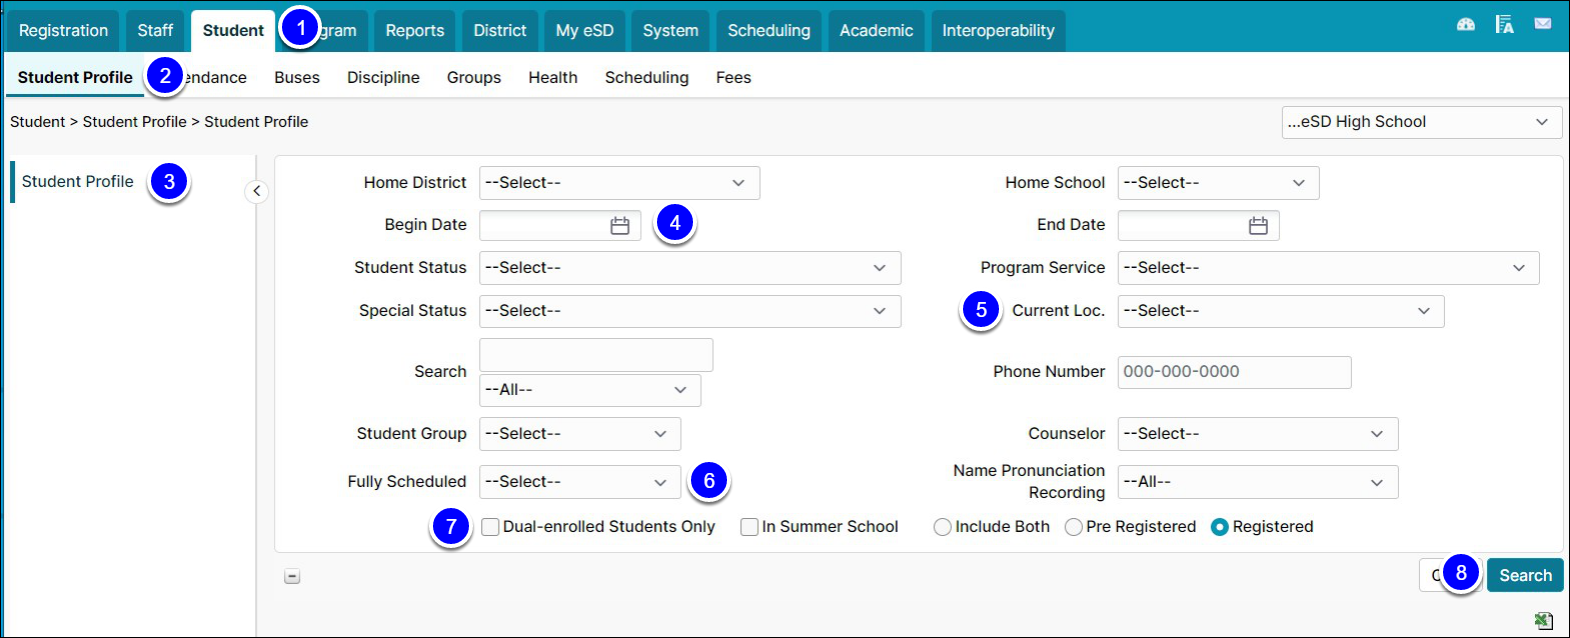 The main application open to the Student Profile seach page. Numerous filters are avaialble to use, and the Search button is highlighted at the bottom right.